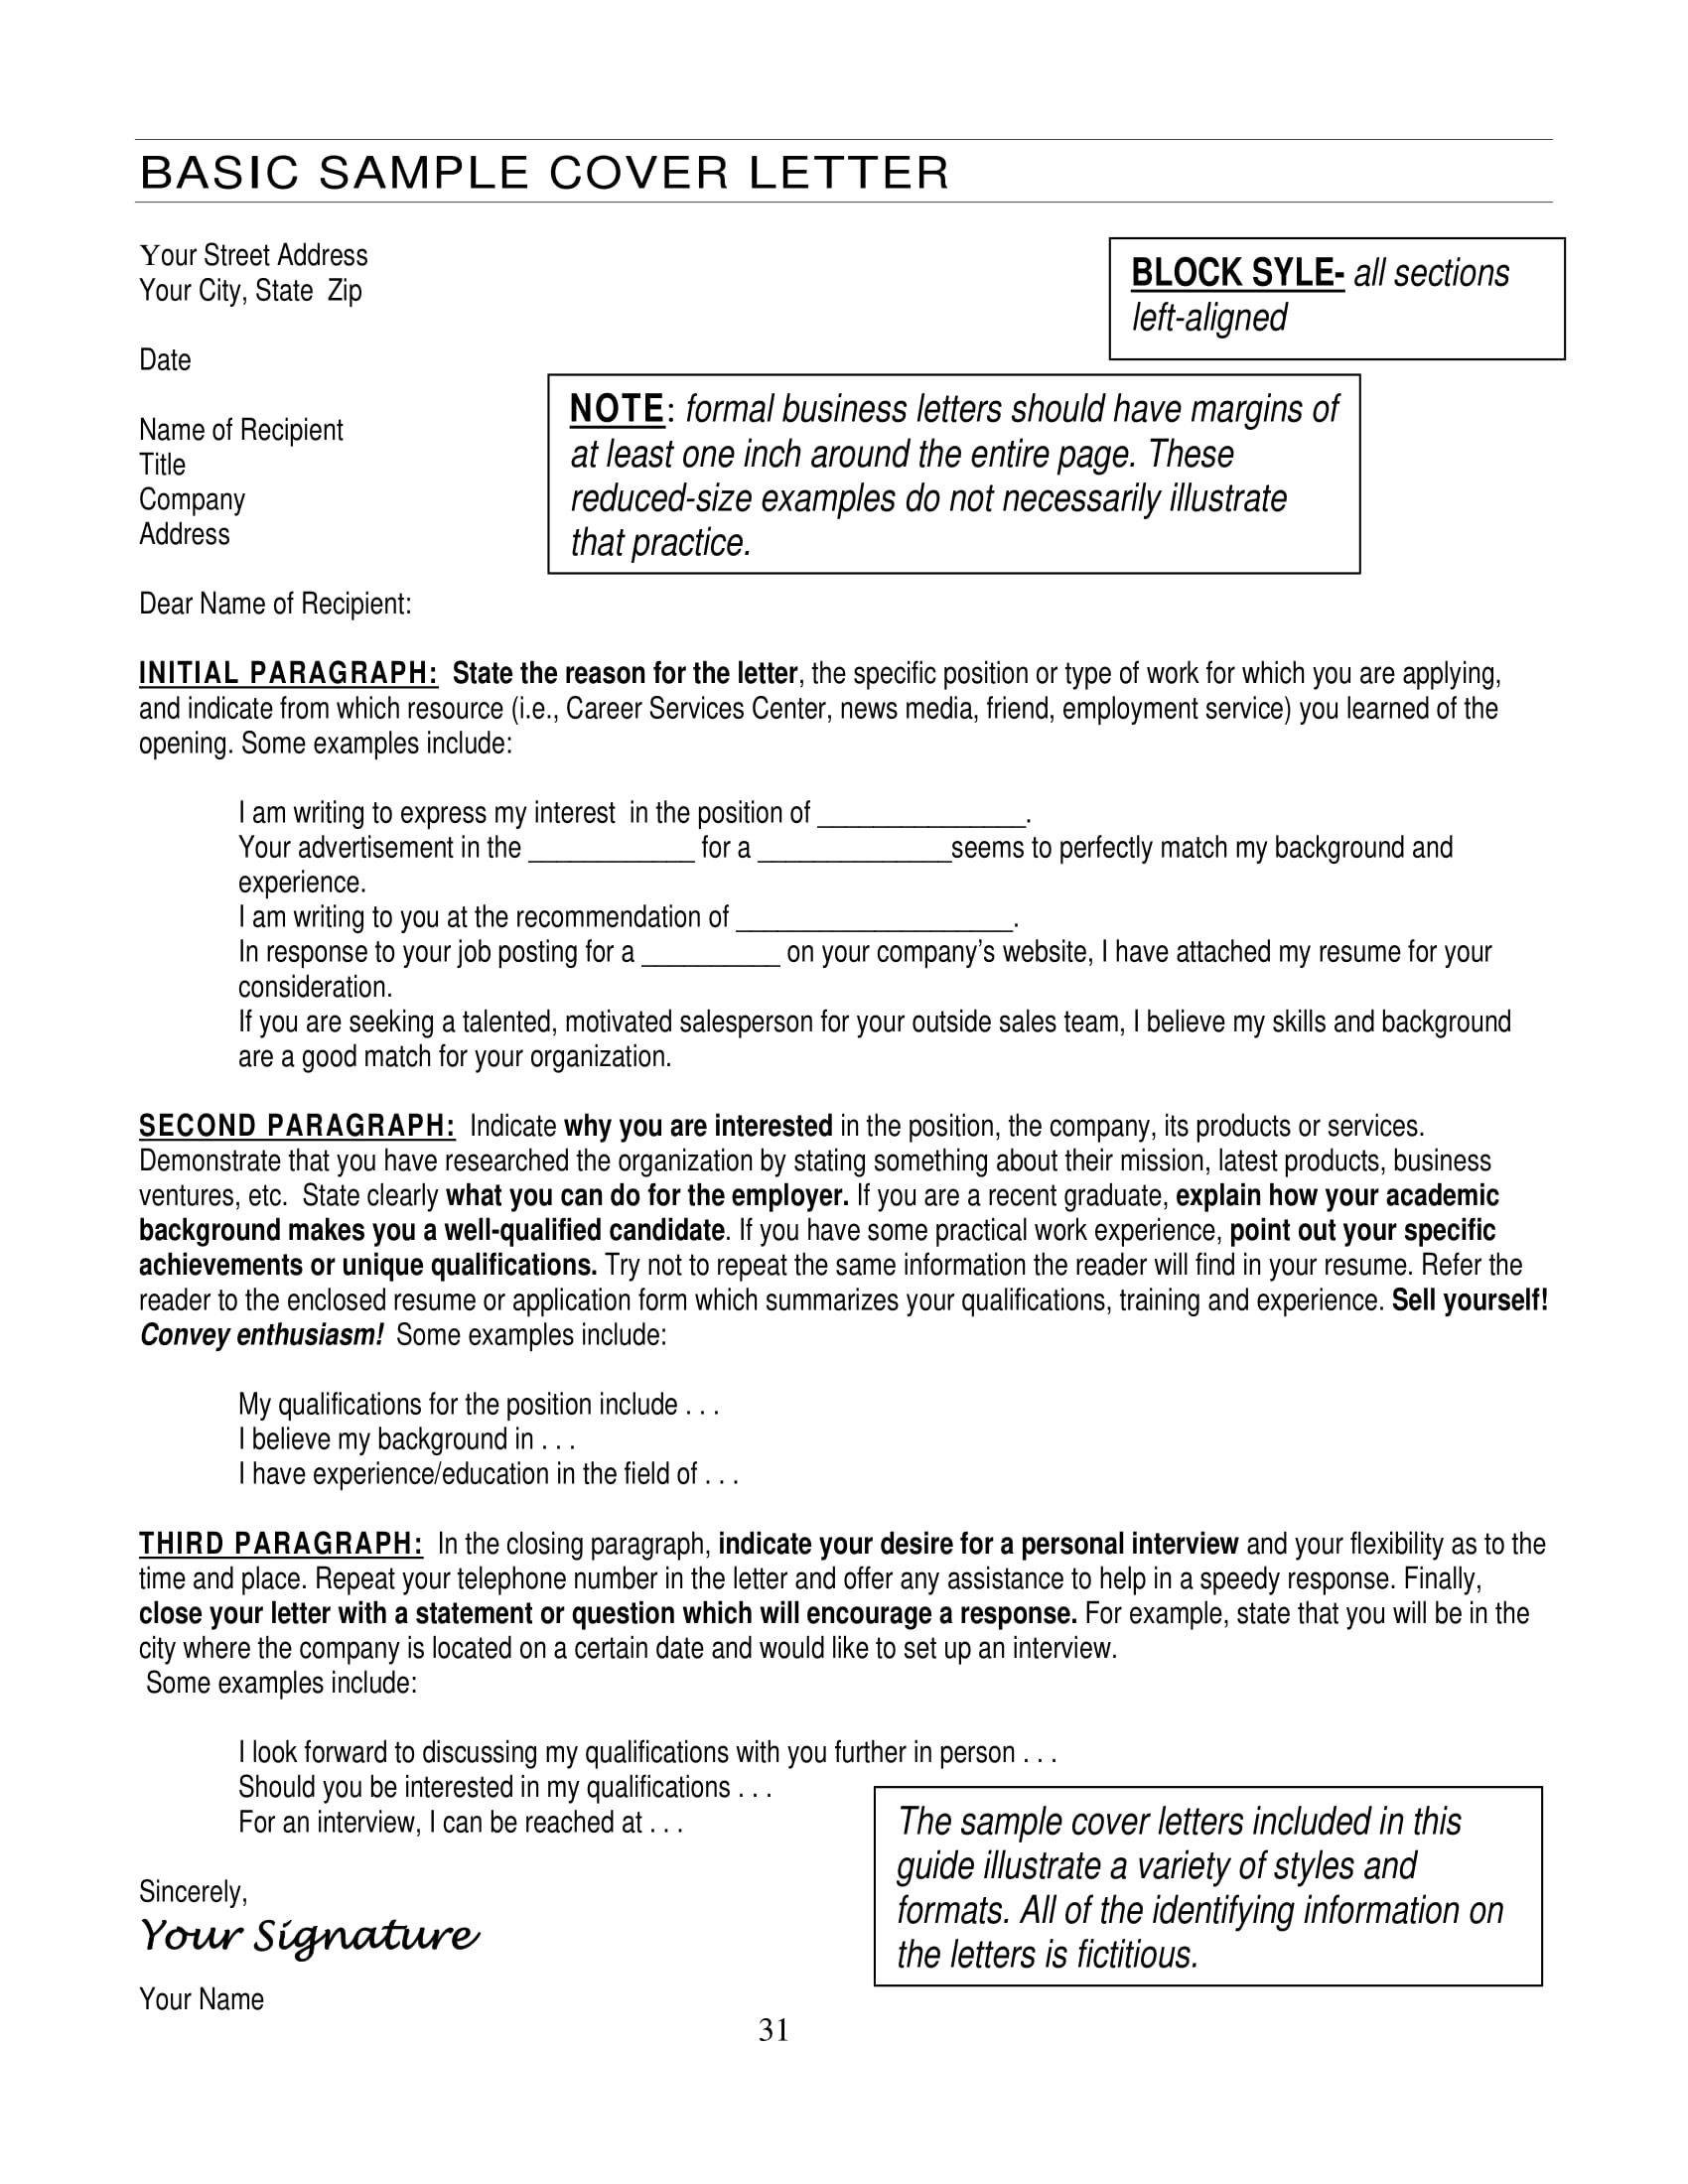 10+ Professional Cover Letter Examples - PDF | Examples